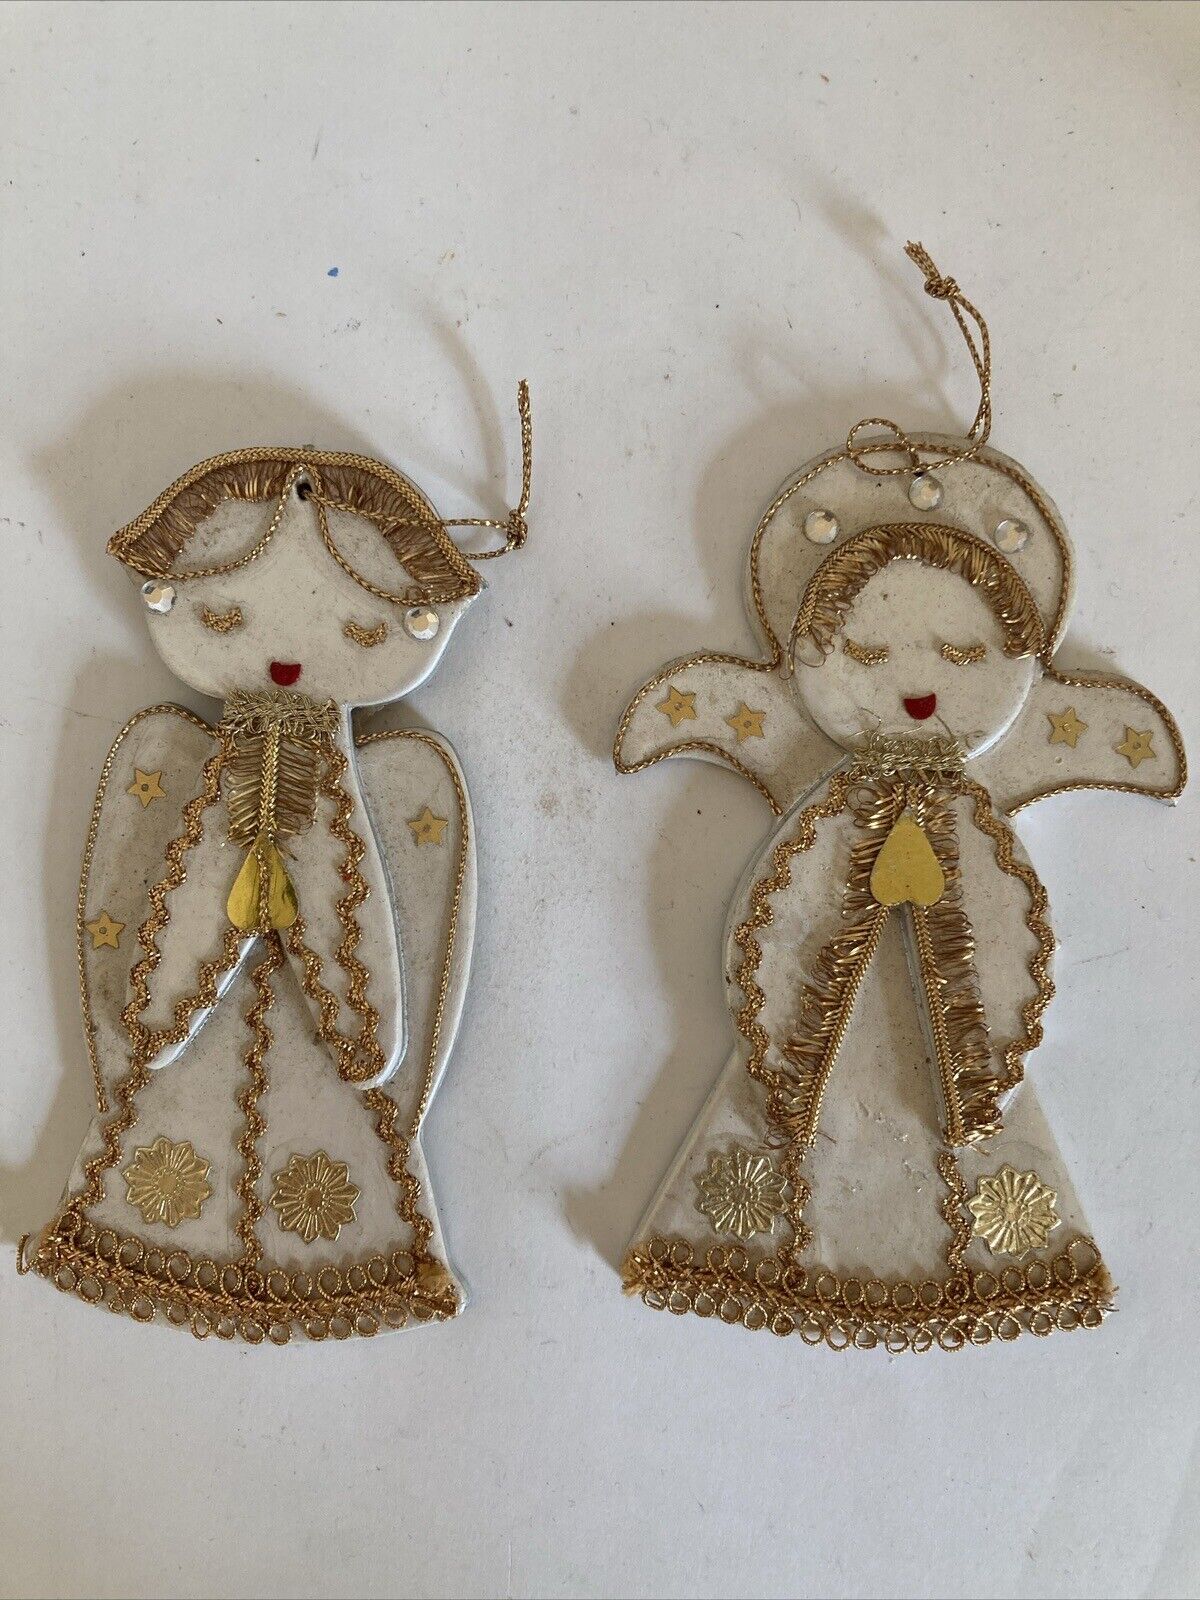 2 Vintage INARCO Japan White Gold ANGEL Christmas Tree Ornament Set